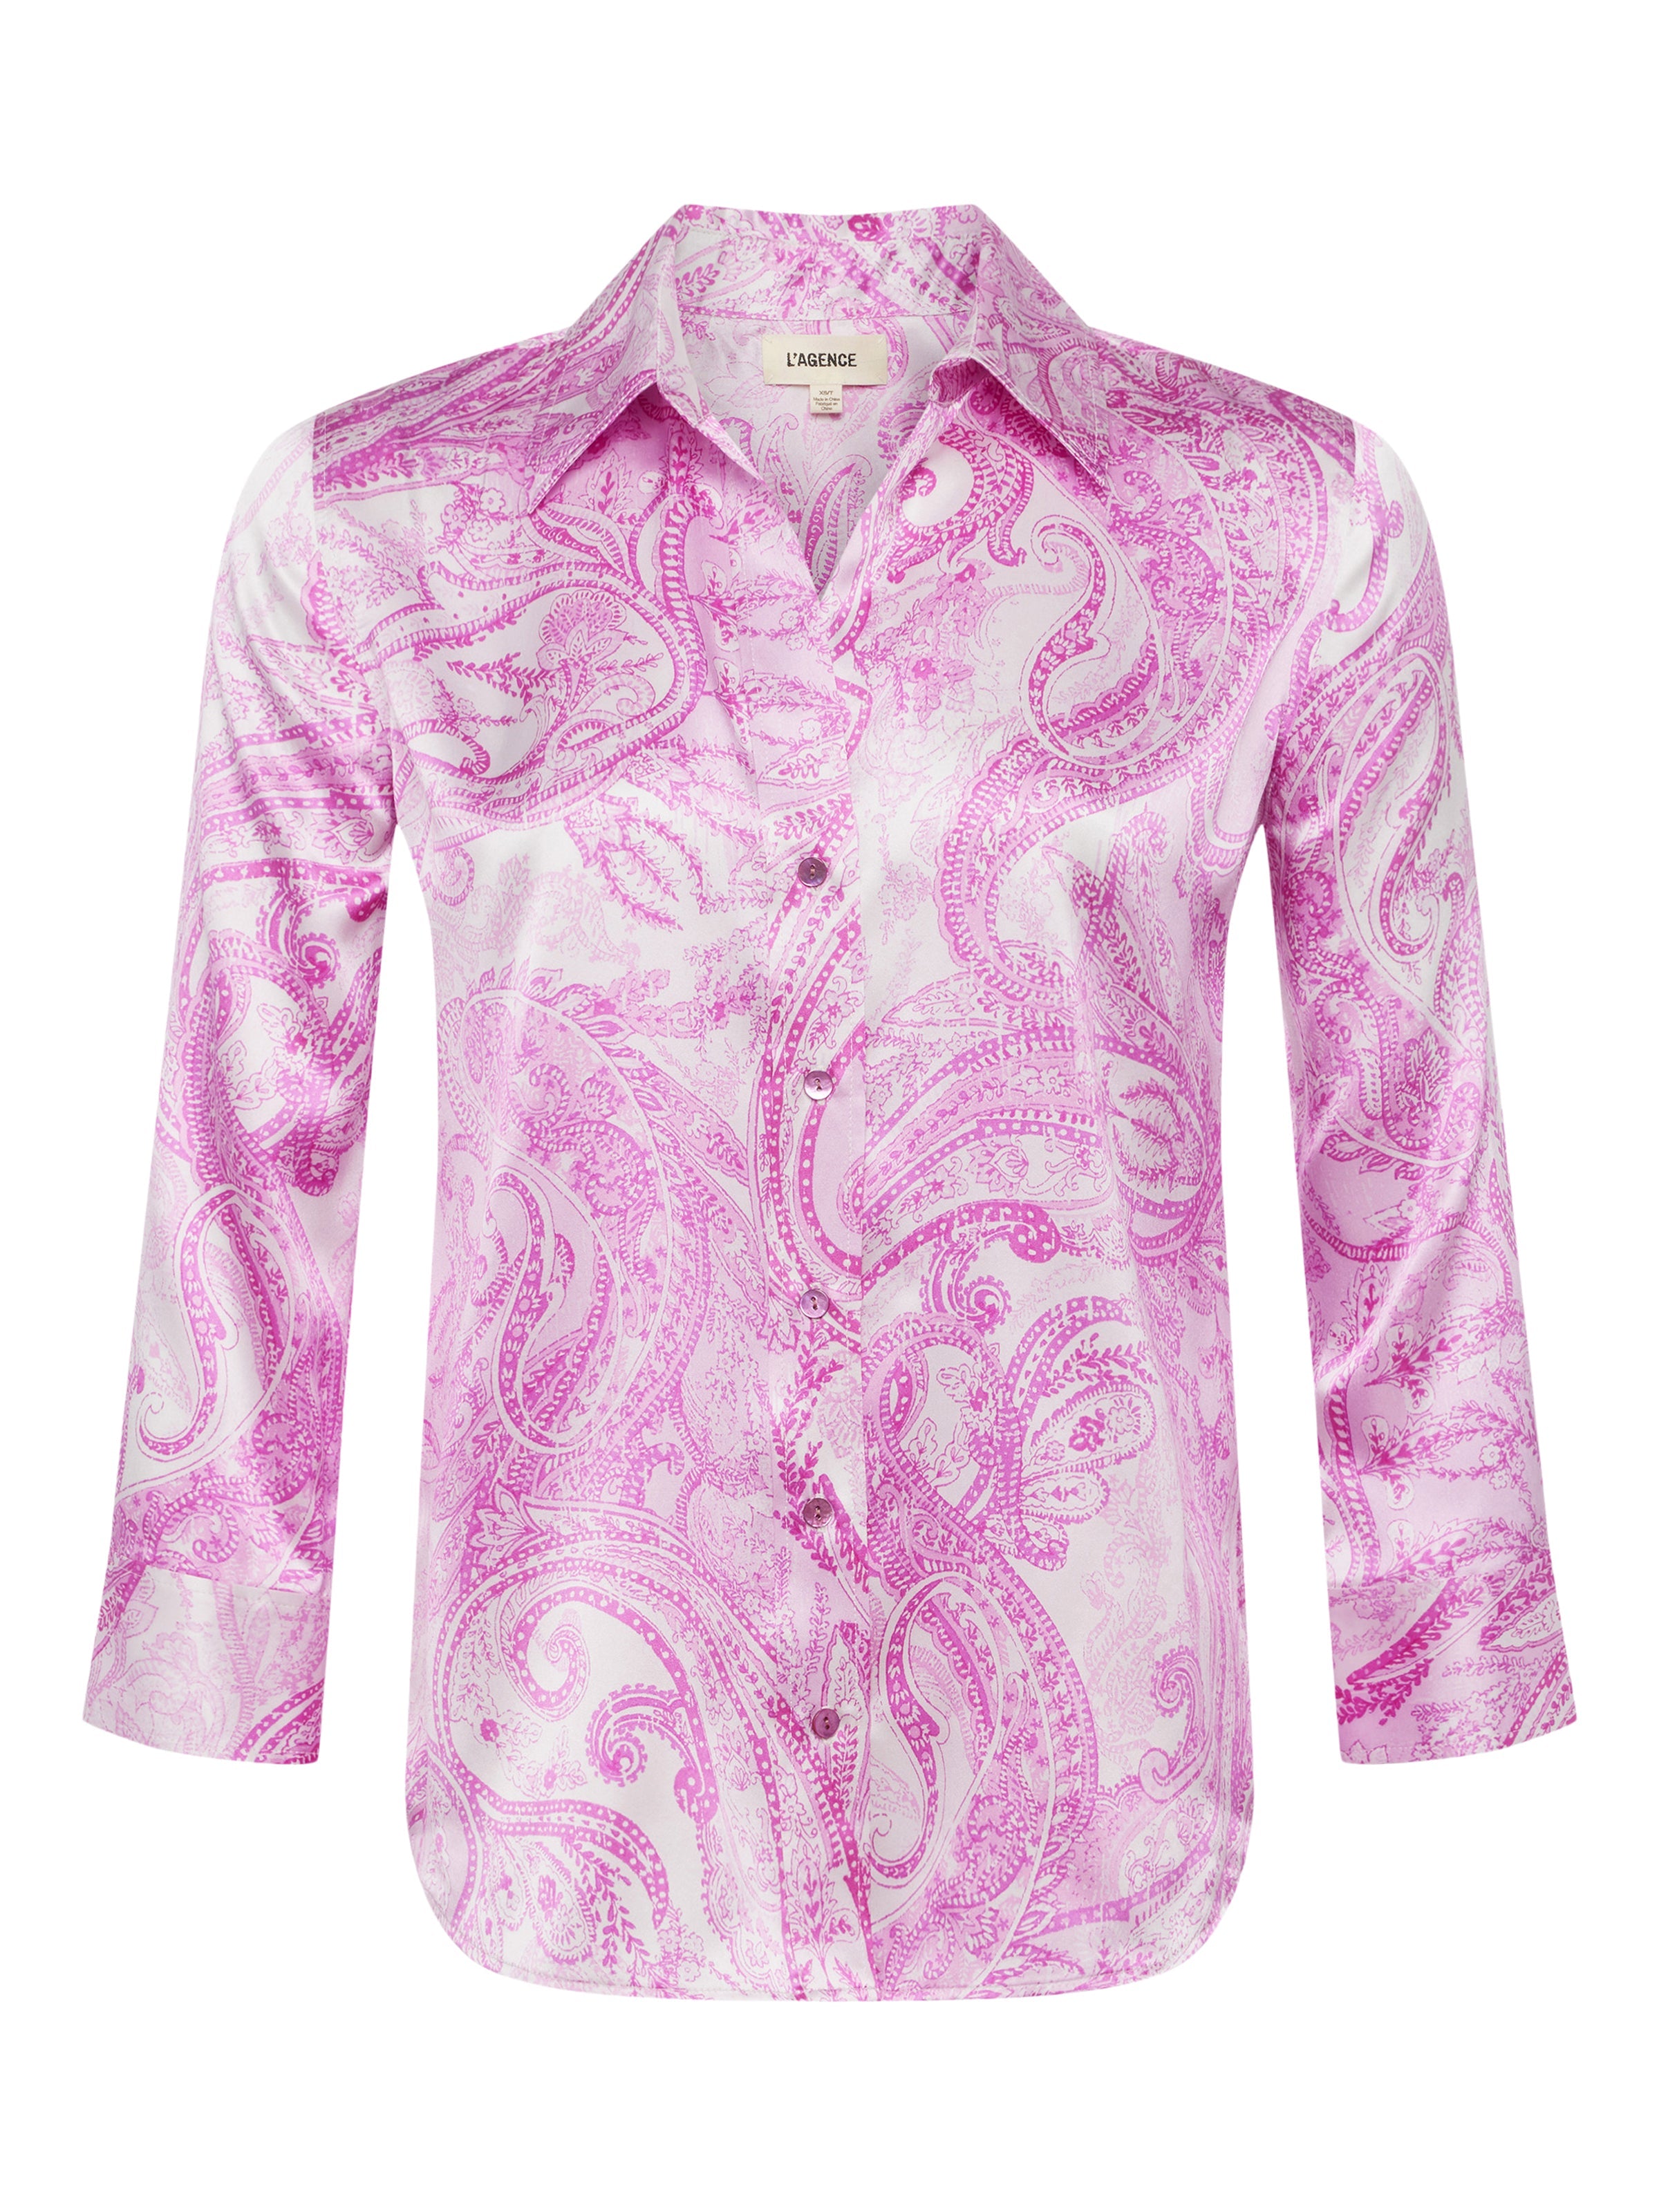 Dani 3/4 Sleeve Blouse in Lilac Snow Decorated Paisley